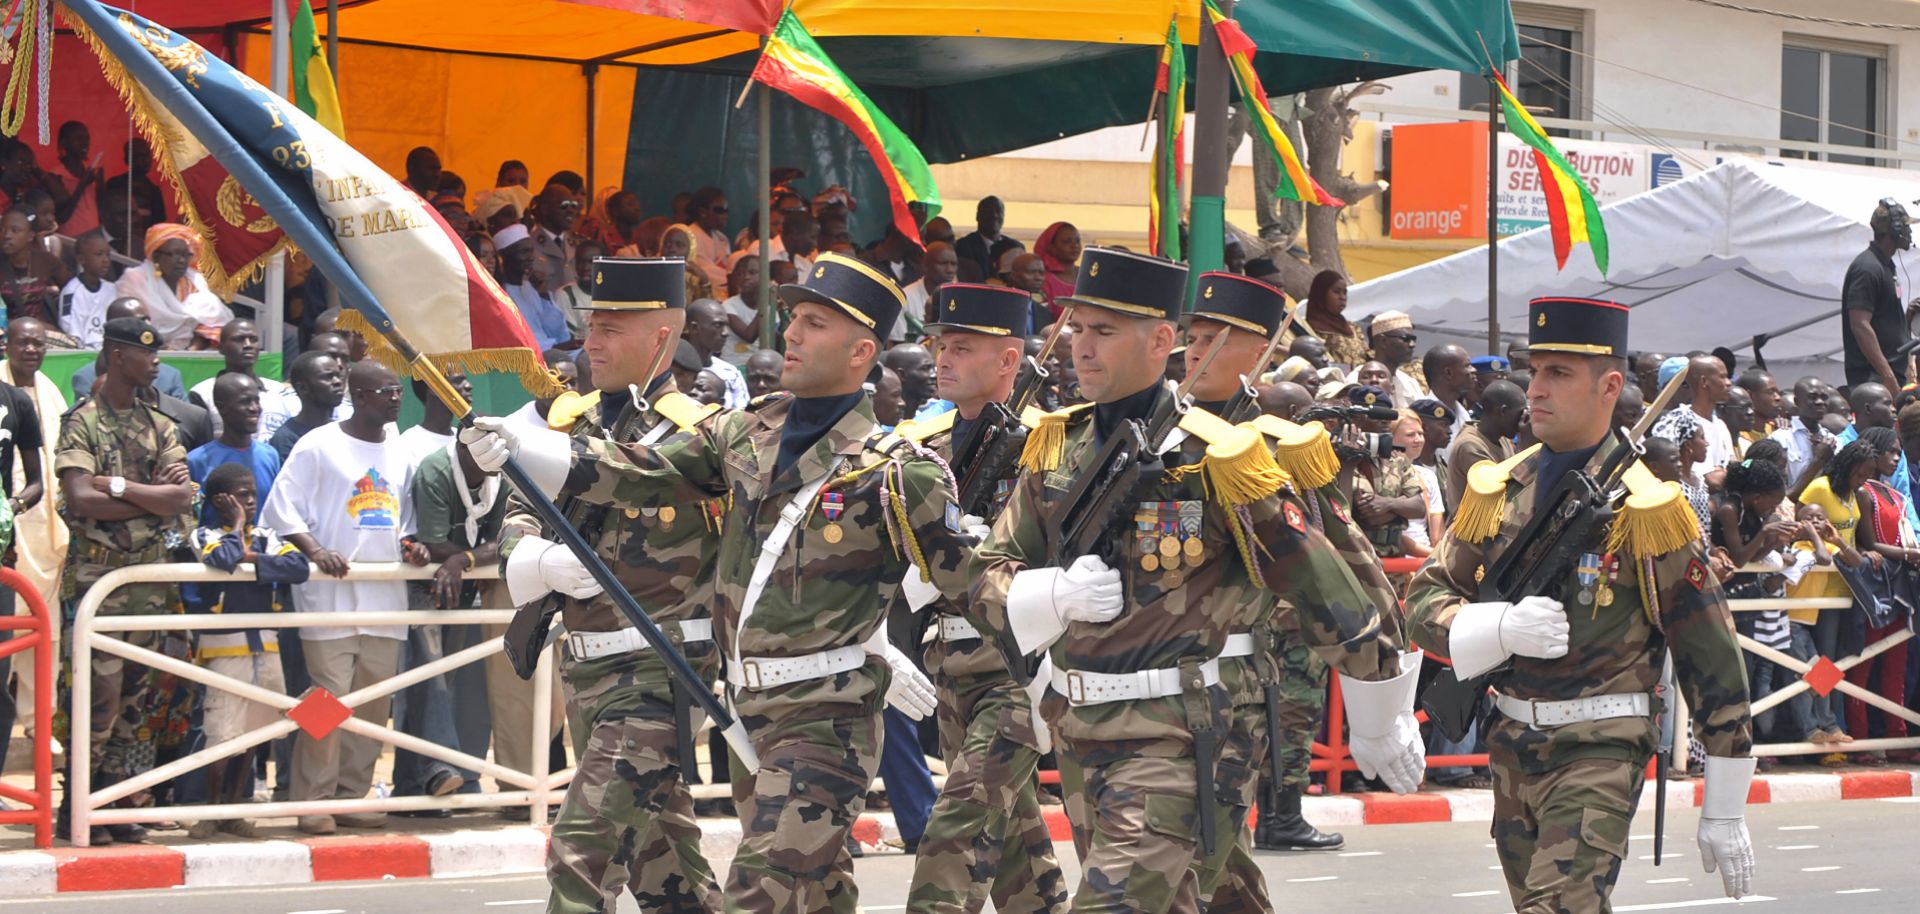 French soldiers march in a military parade in Dakar, Senegal, in April 2010.